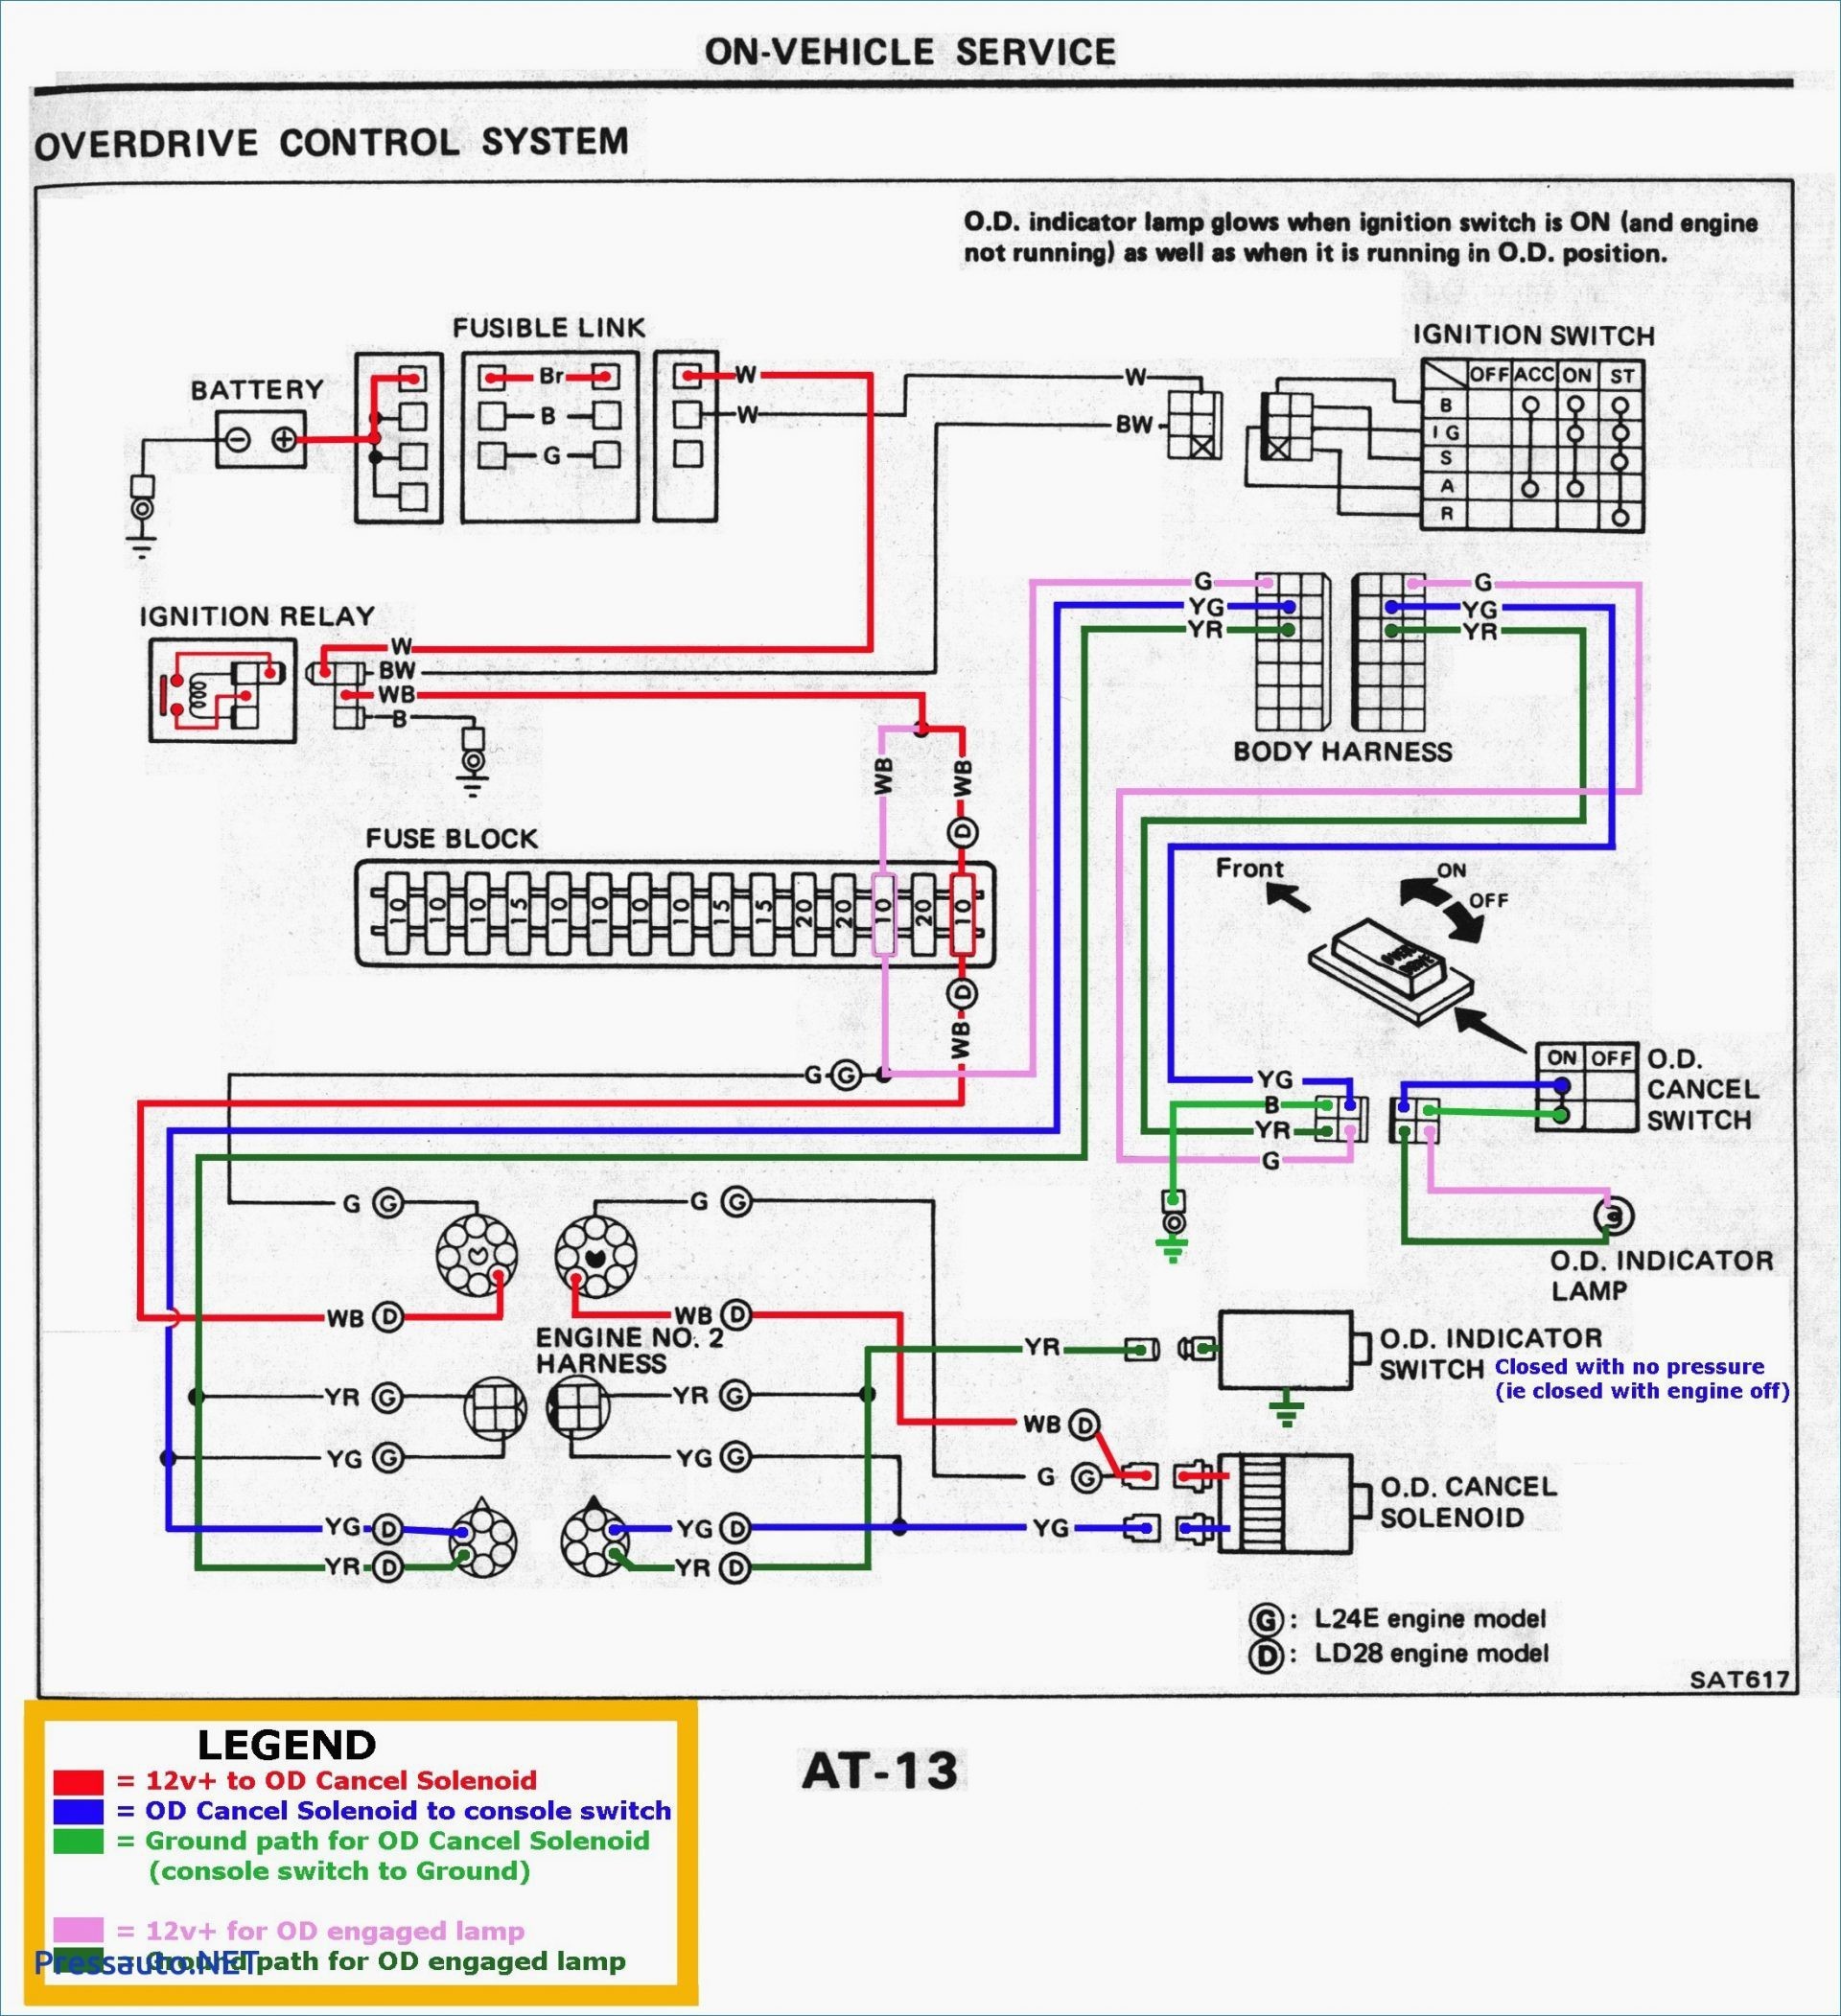 Wiring Diagram for Remote Car Starter Refrence Led Tail Lights Wiring Diagram 86 toyota Pickup Tail